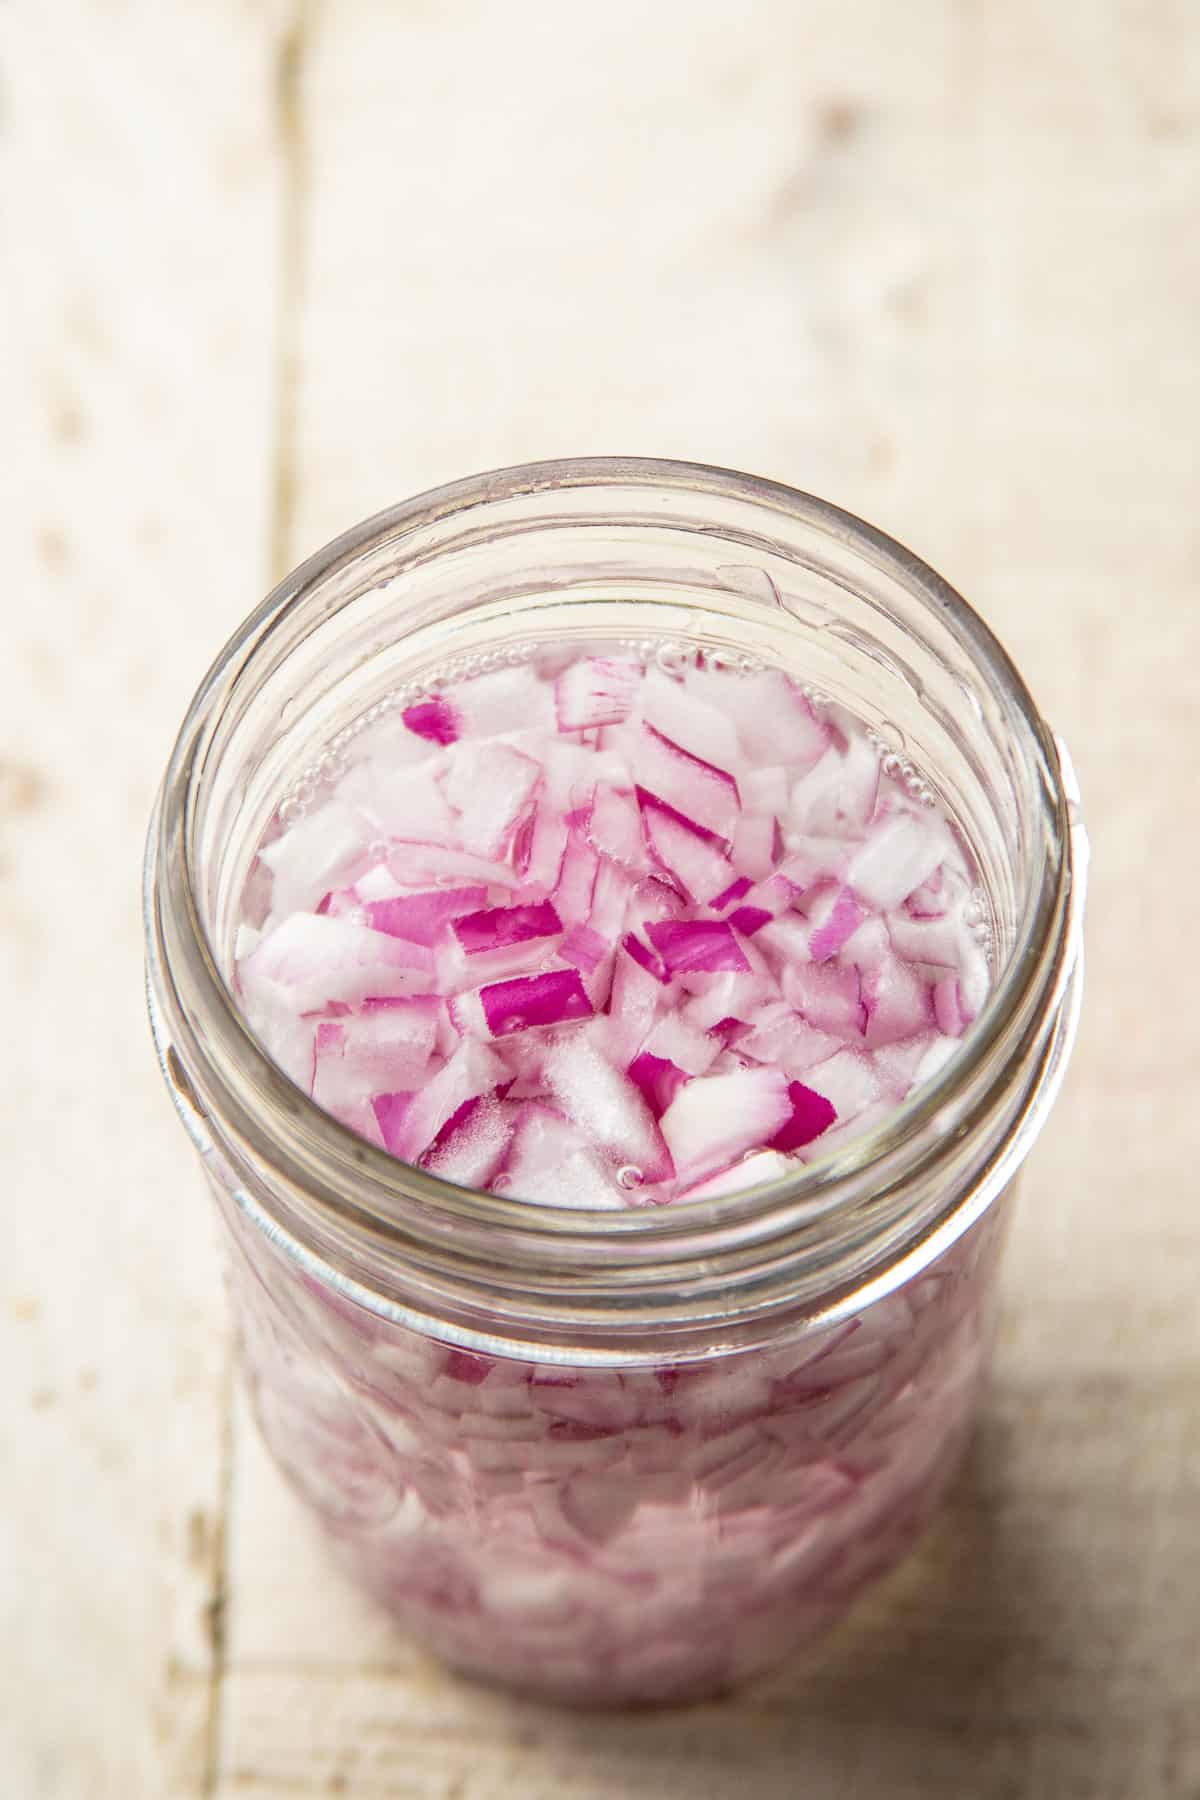 Diced red onion soaking in a glass of water.